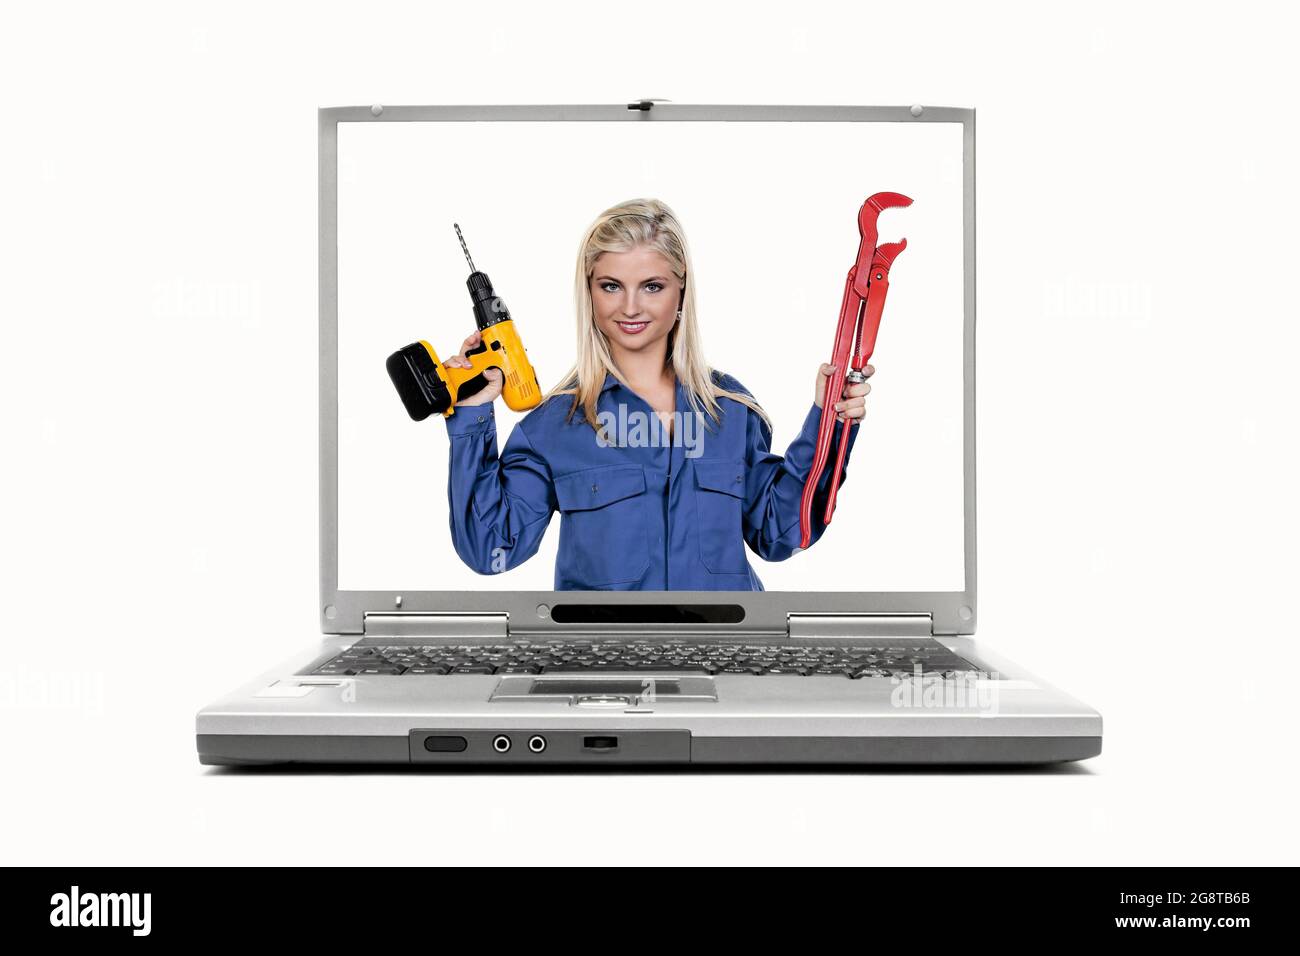 craftswoman on the display of a laptop Stock Photo